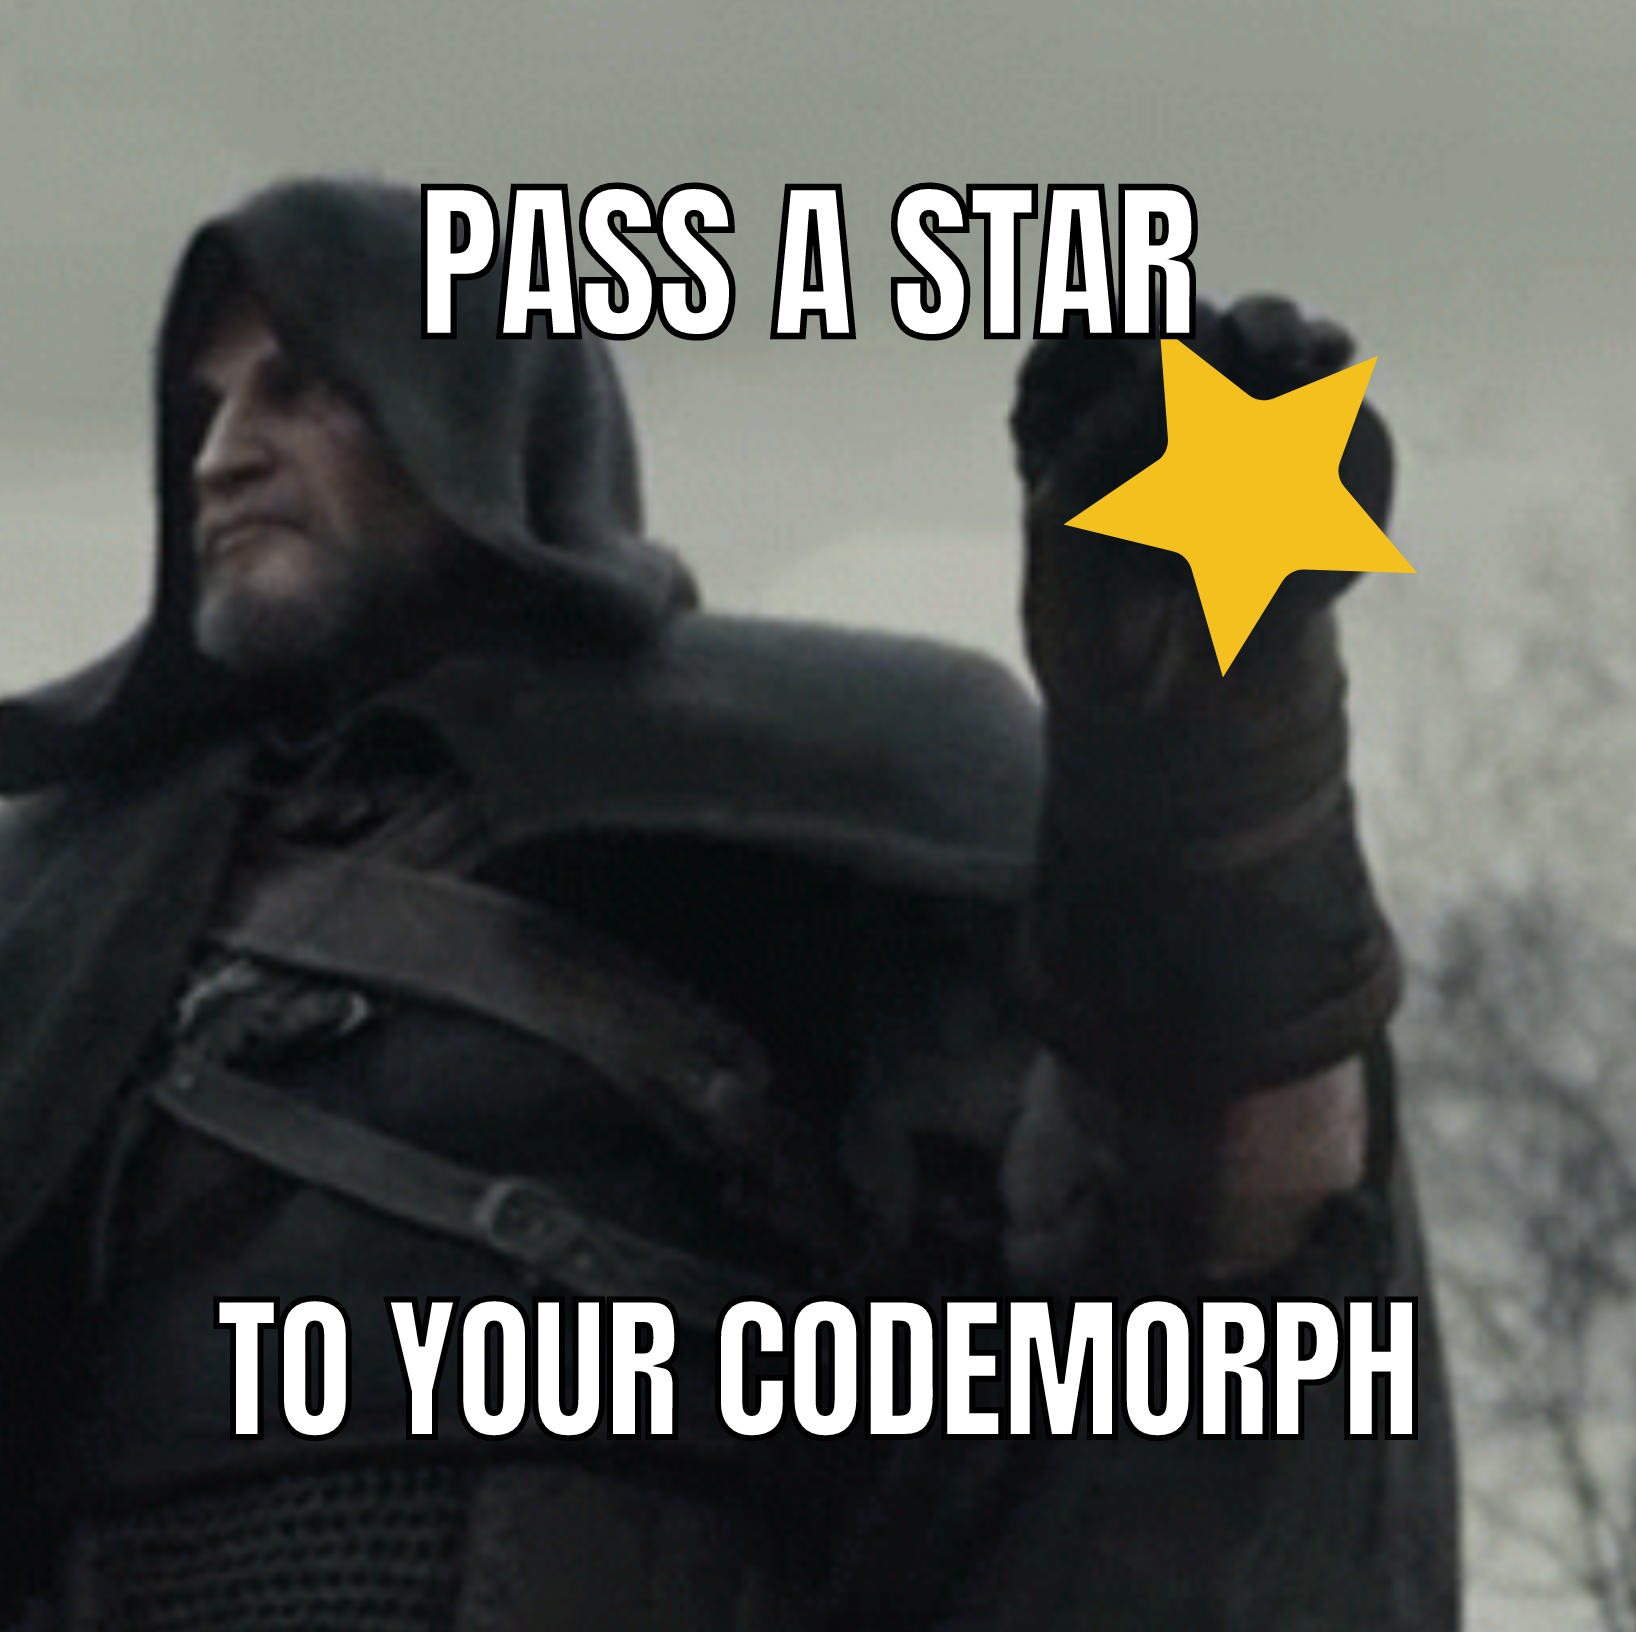 Pass a star to your codemorph